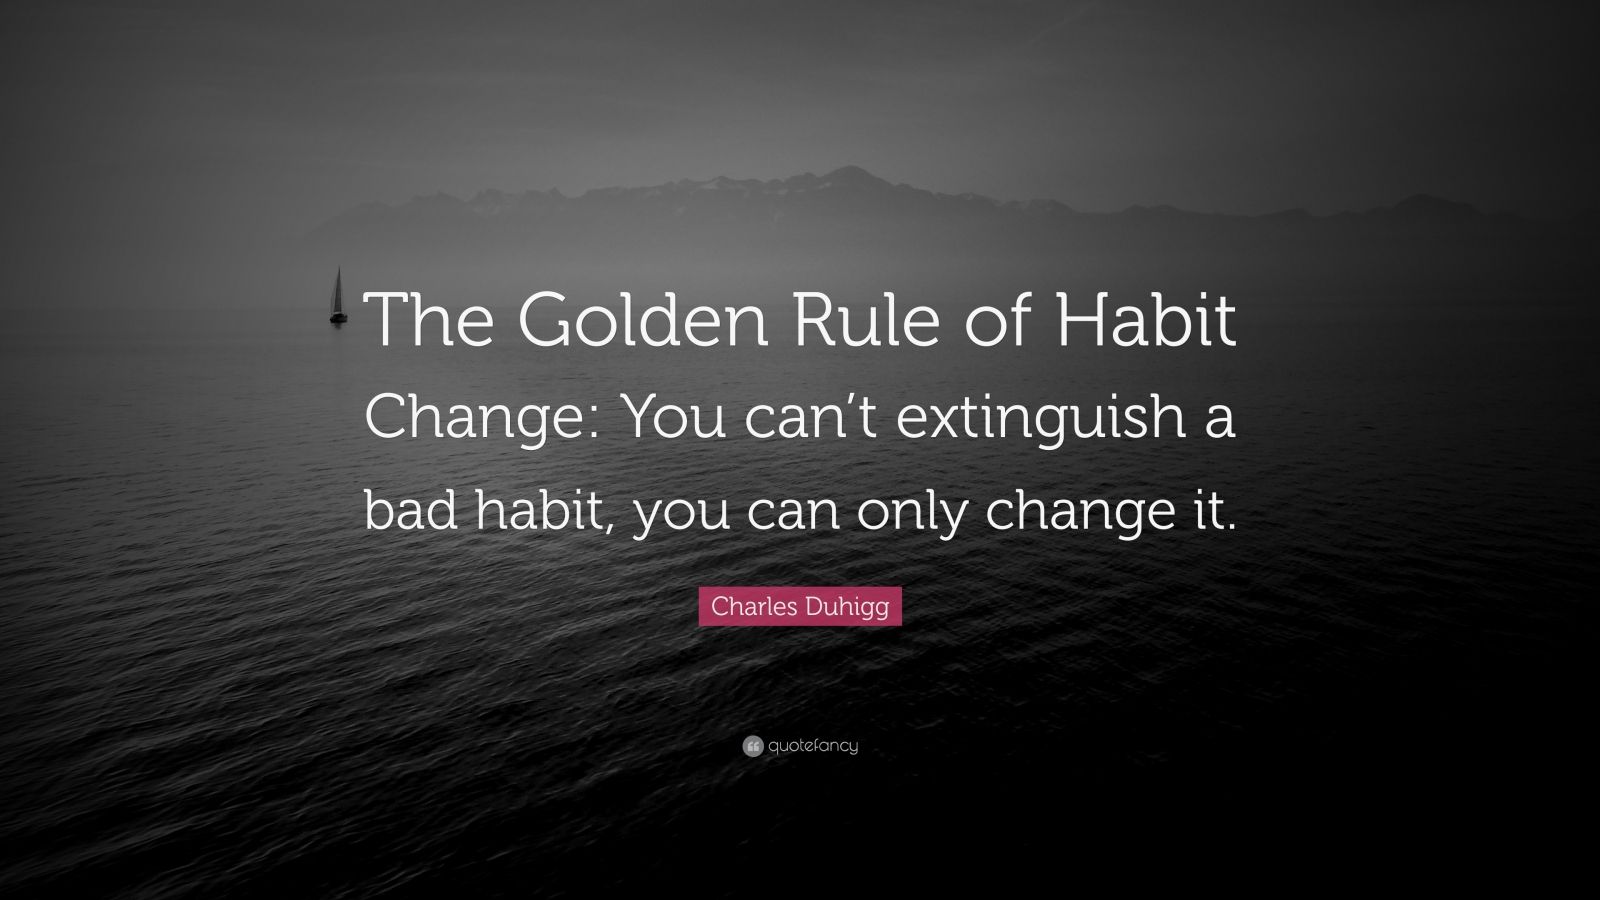 Charles Duhigg Quote: “The Golden Rule of Habit Change: You can’t